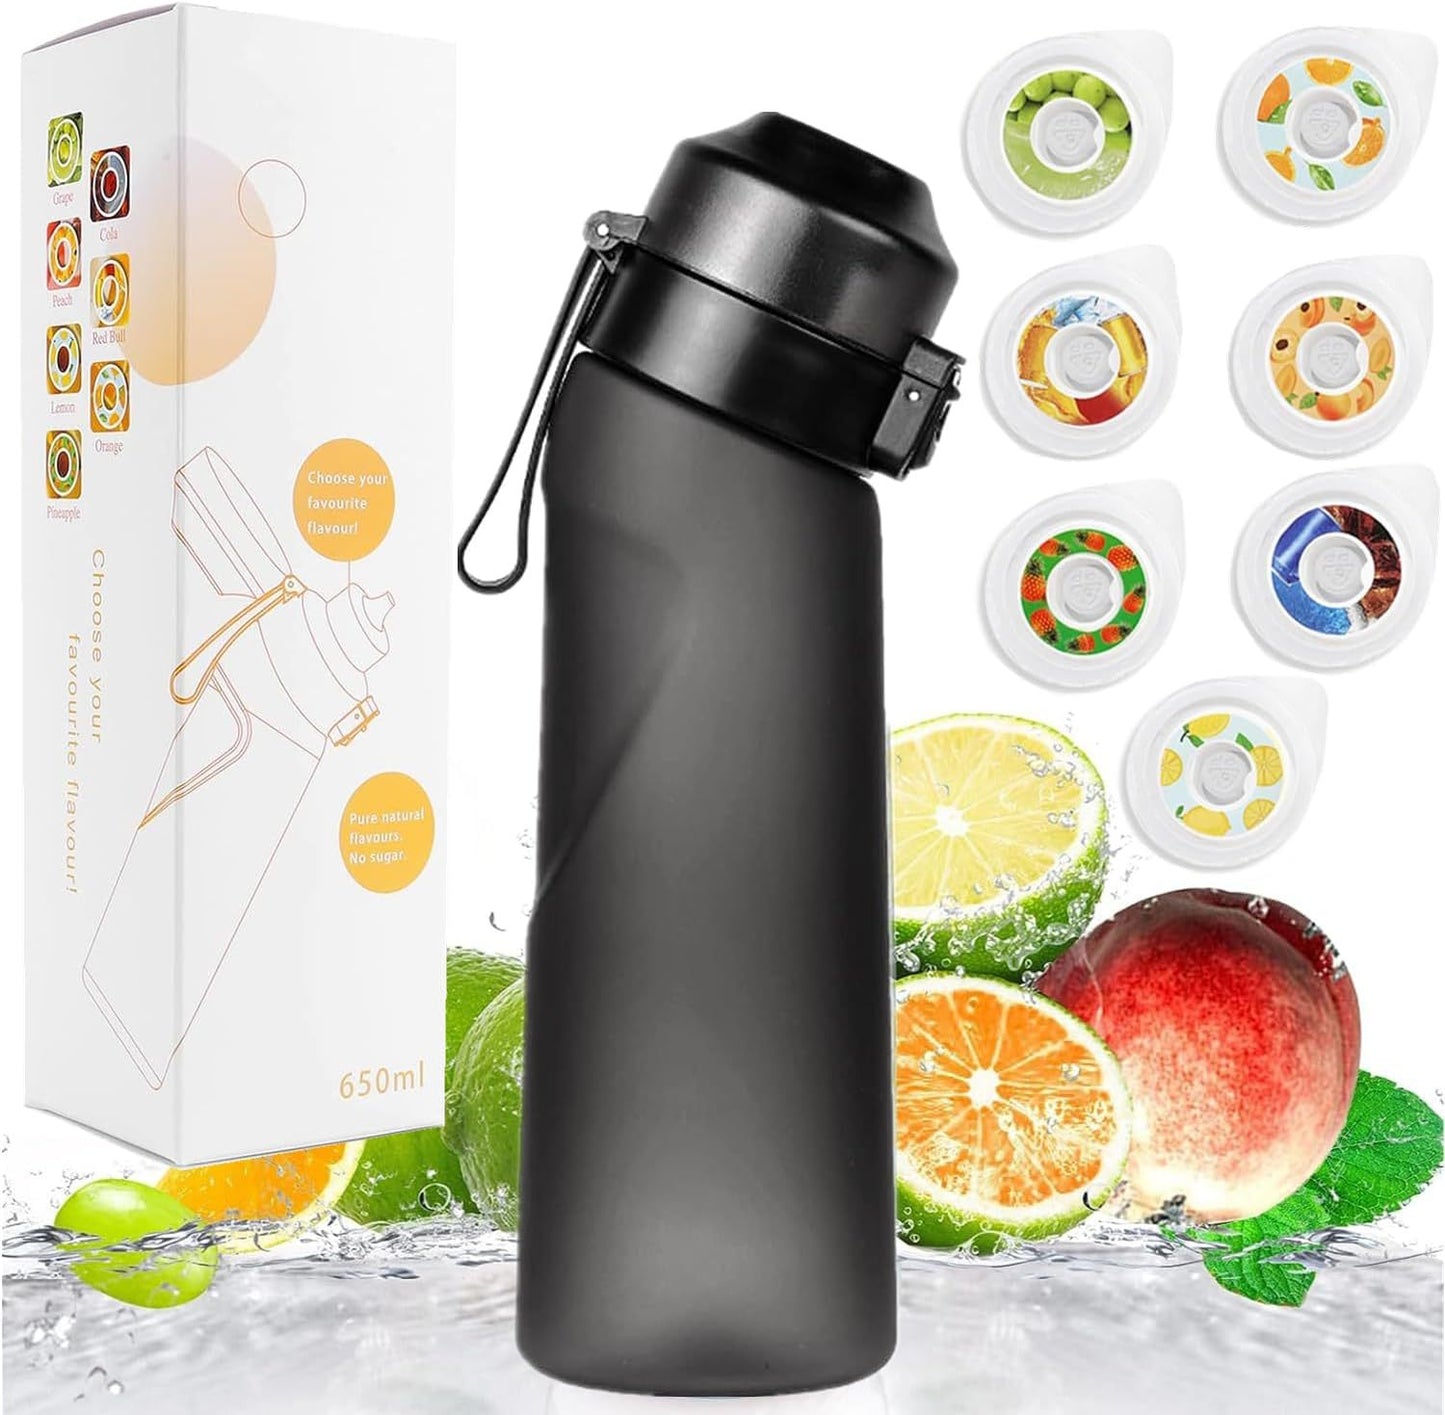 Gradient Color Water Bottle Flavour Pods Pack With 7 Flavour Pods 650ml Fruit Fragrance Scented Water Cup BPA Free 0% Sugar